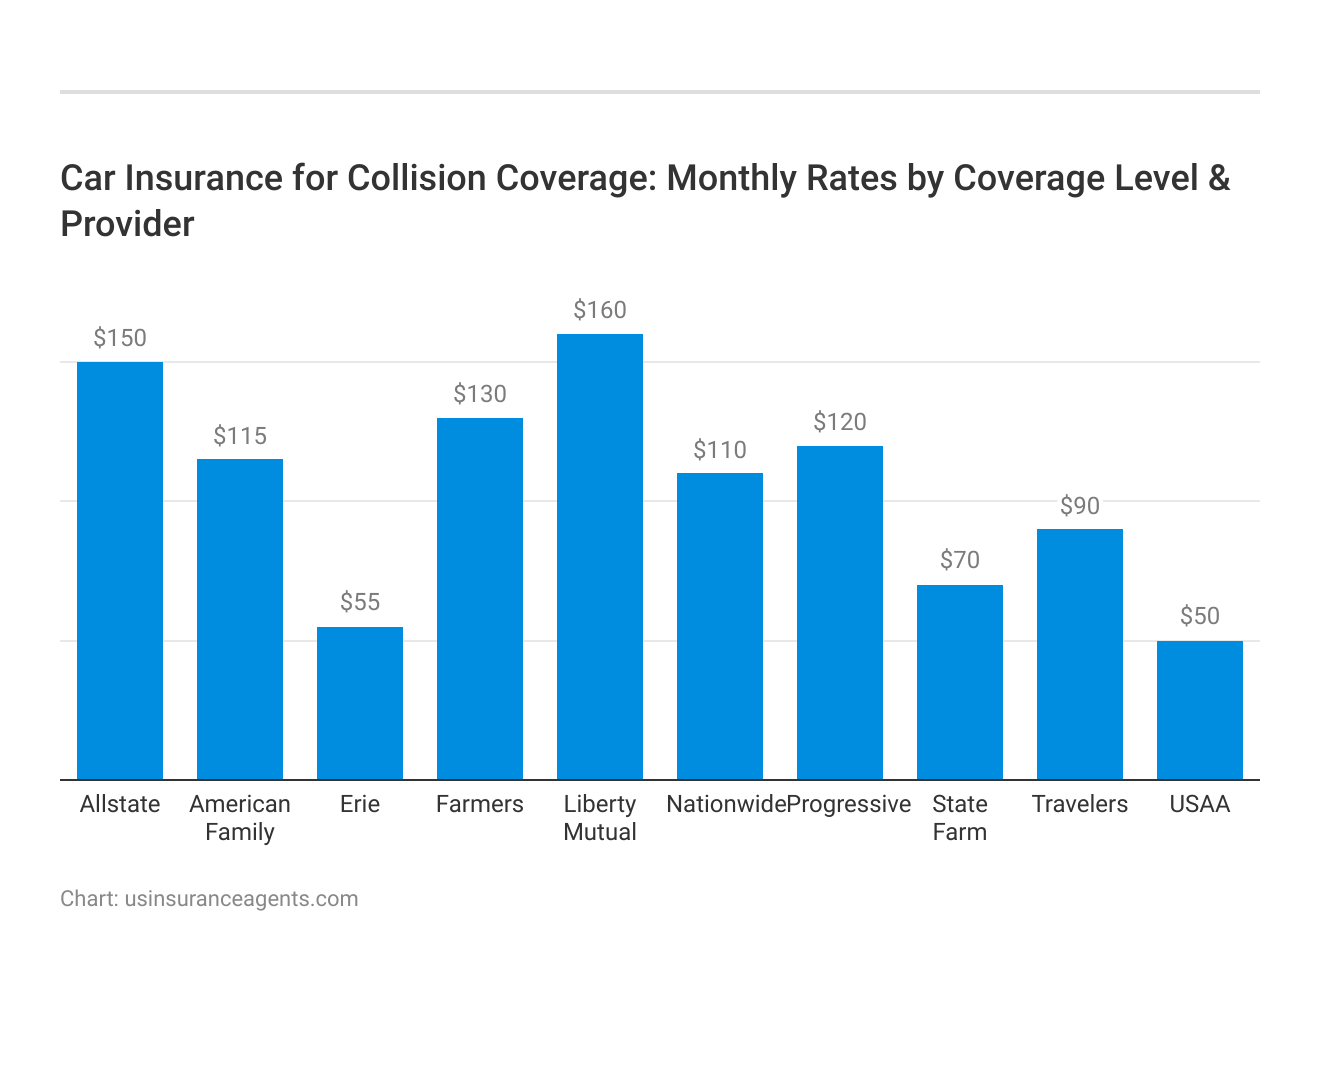 <h3>Car Insurance for Collision Coverage: Monthly Rates by Coverage Level & Provider</h3>